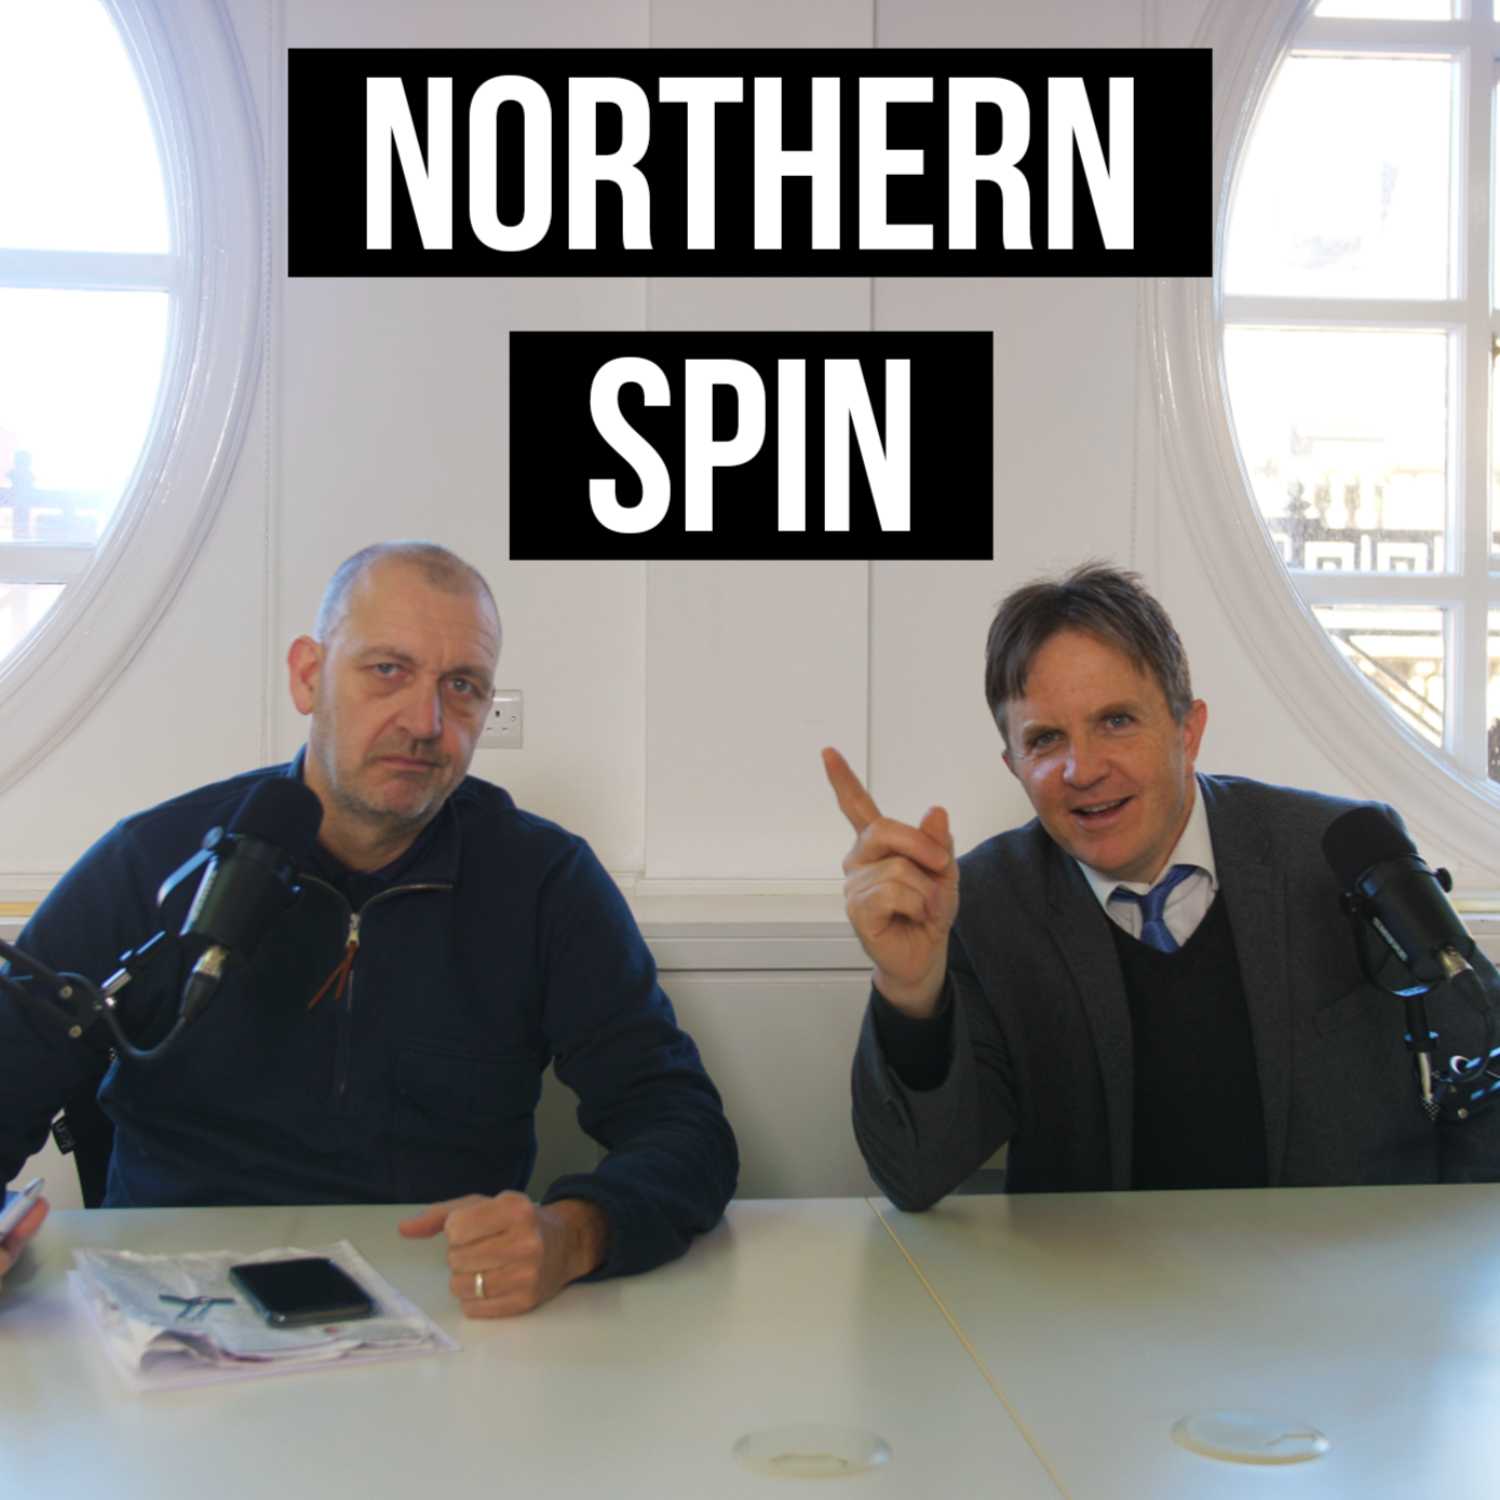 Northern Spin - Season 4 - Episode 2: What Is a Conservative?